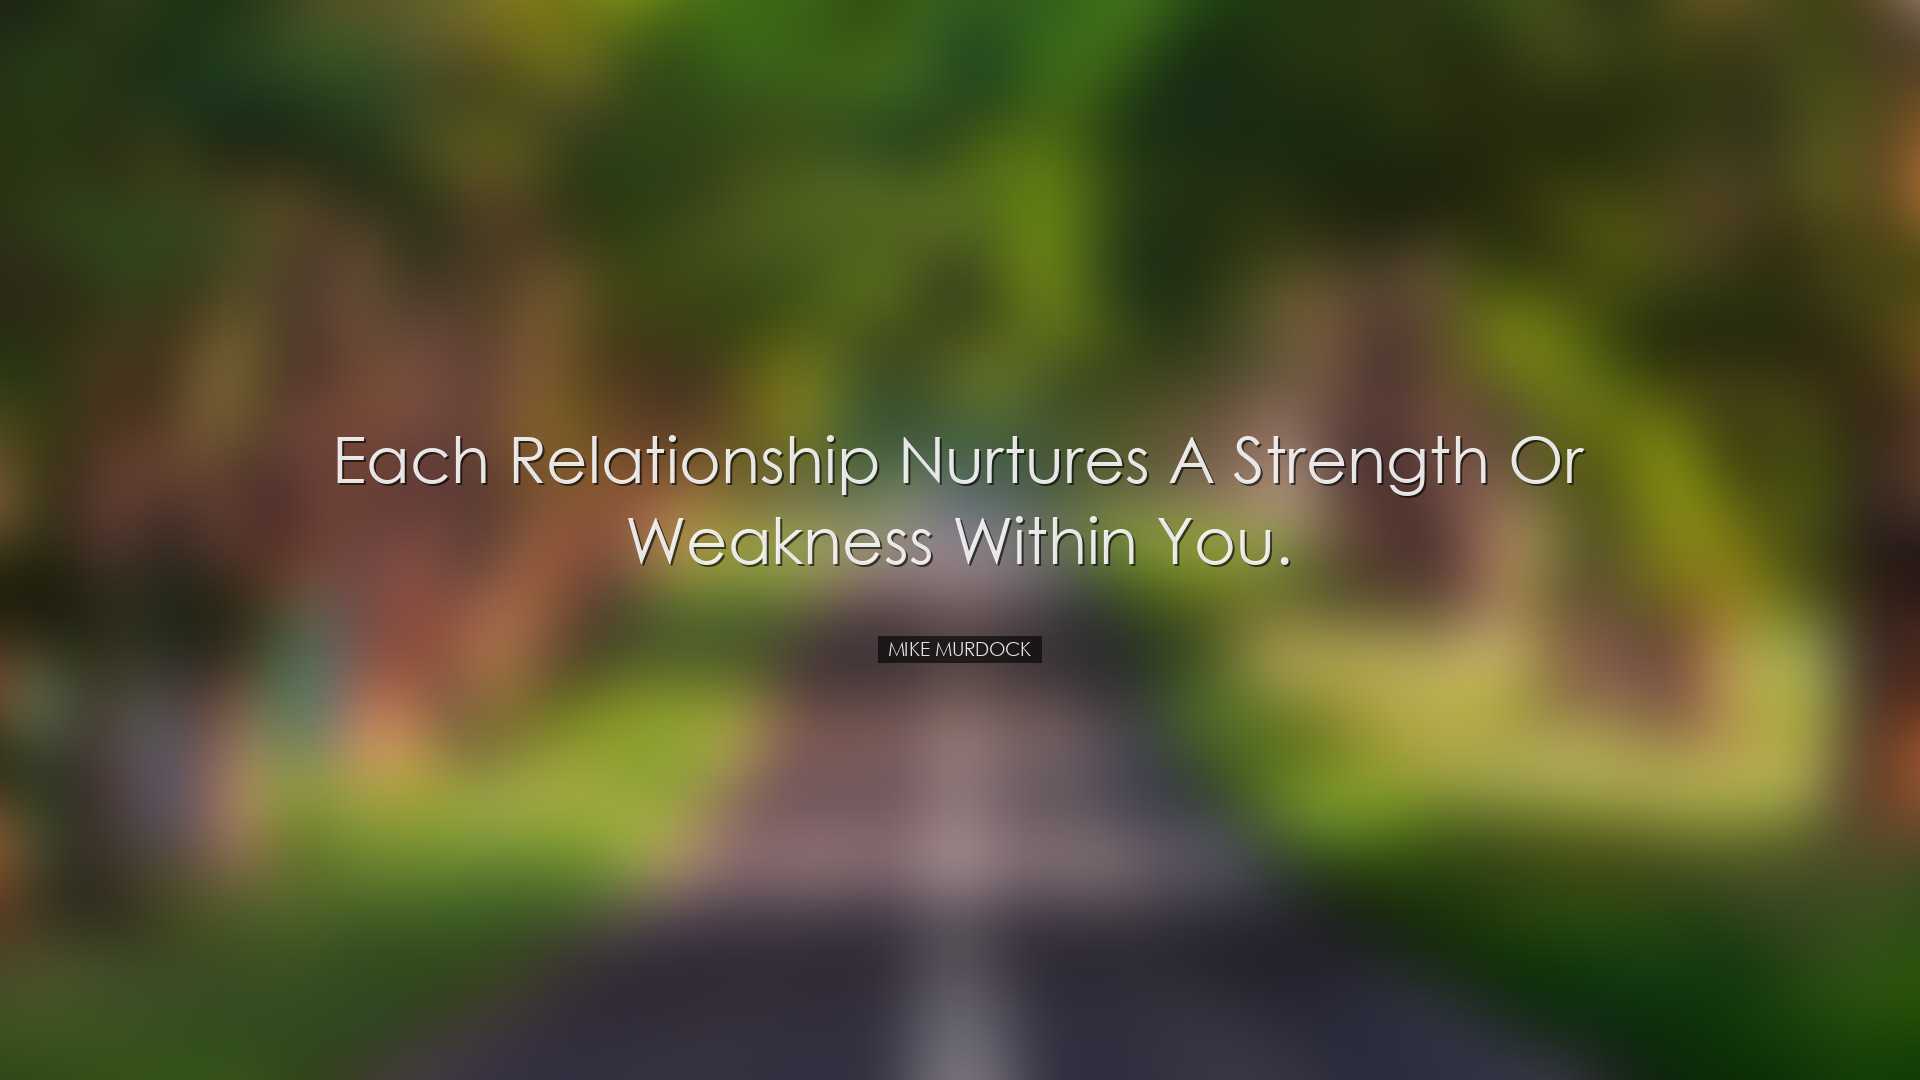 Each relationship nurtures a strength or weakness within you. - Mi